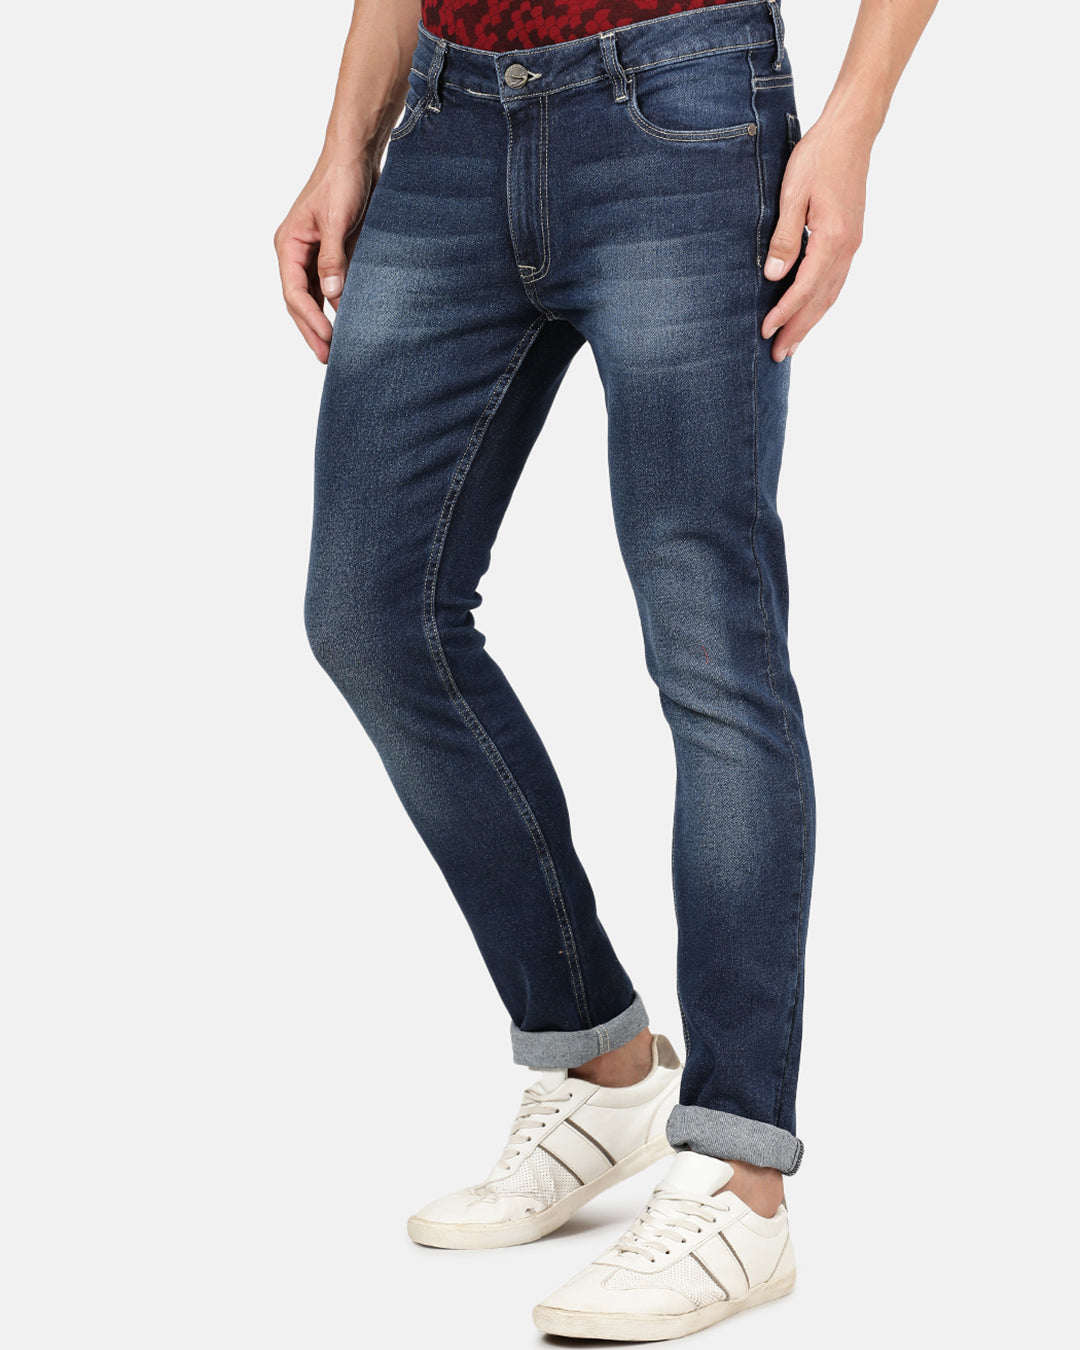 Crocodile Casual Denim Jeans Slim Tapered Solid Pant Mid Blue